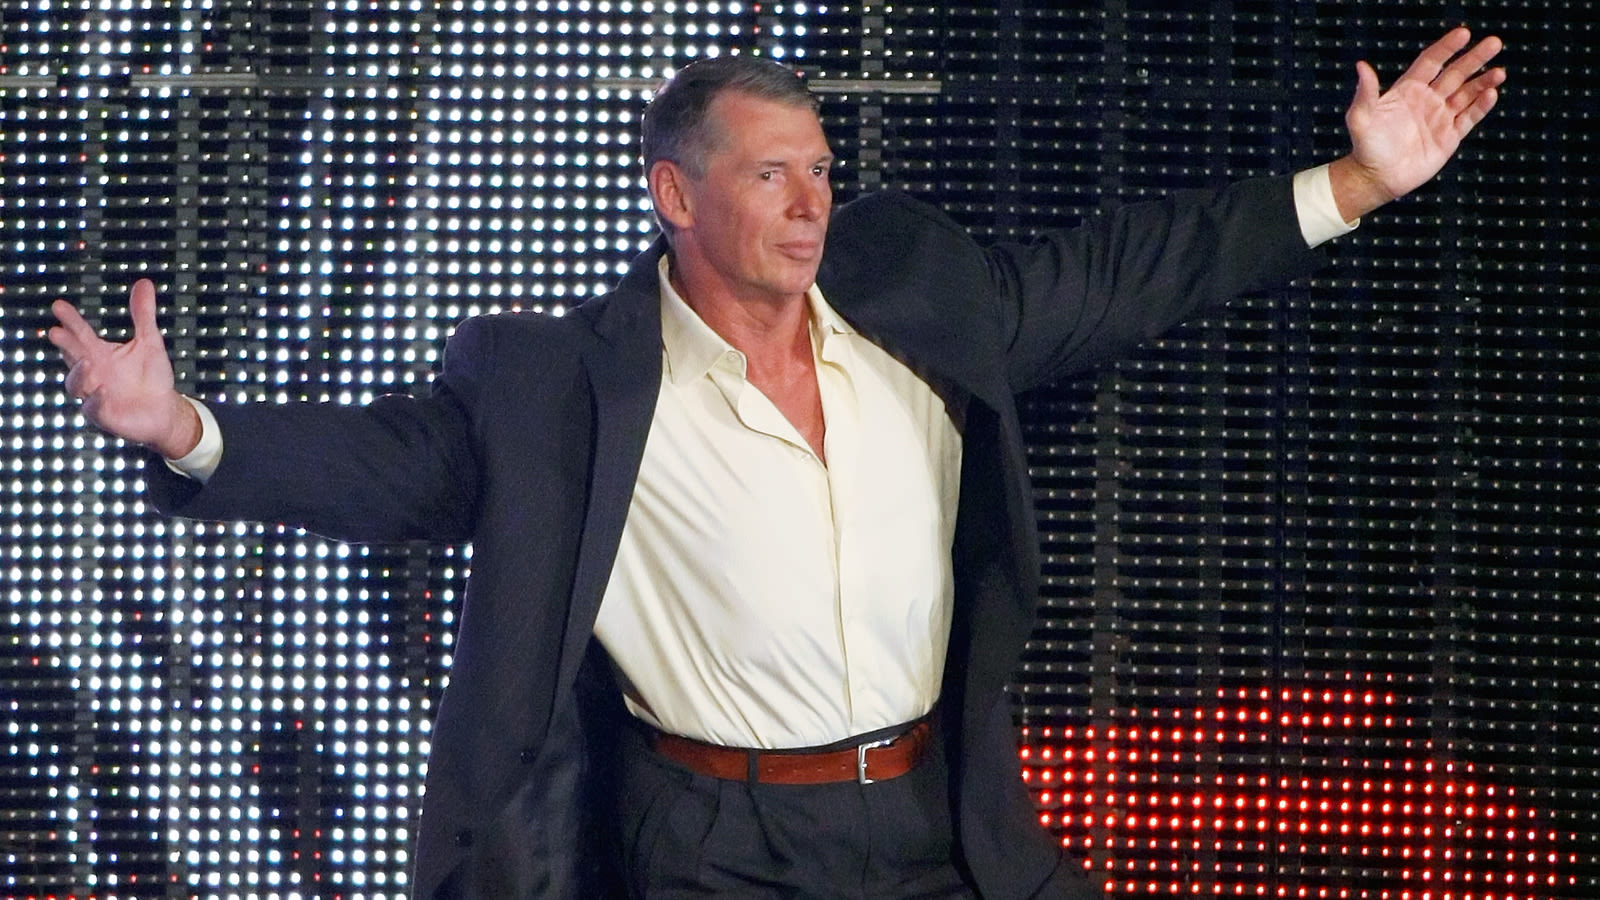 WWE Exec Bruce Prichard Looks To Dispel Vince McMahon Misconception - Wrestling Inc.